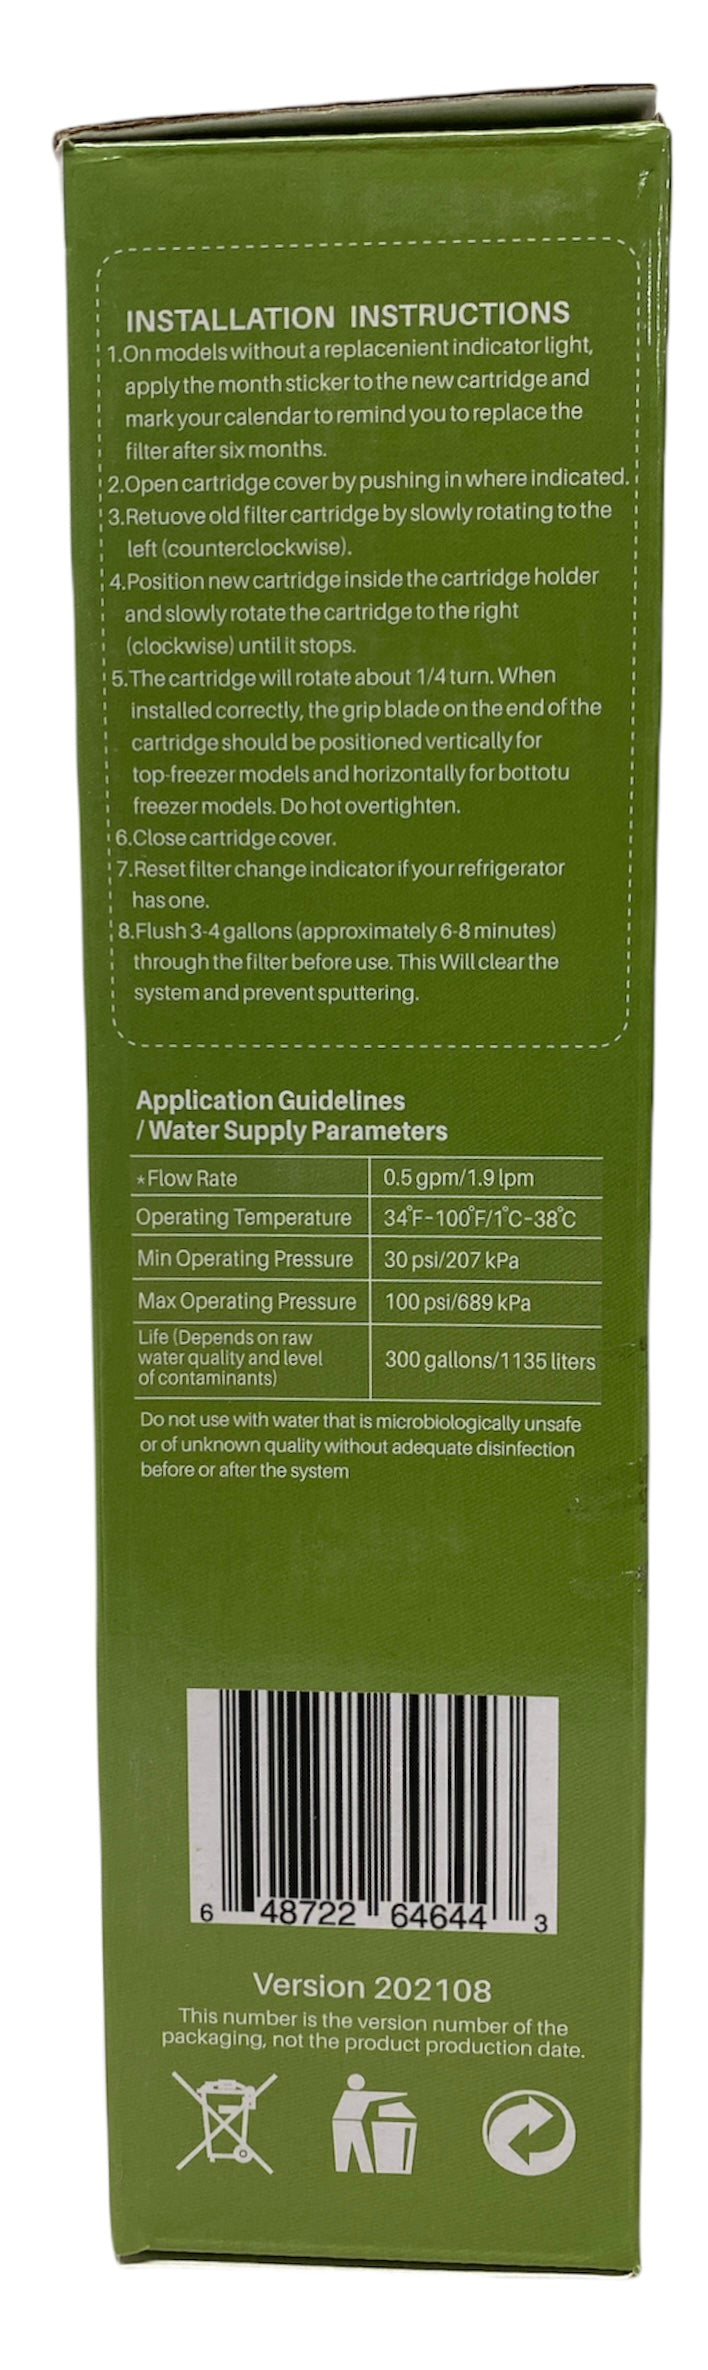 RWF3000A Refrigerator Water Filter IAPMO Certified Replacement for GE GSWF Smart Water 238C2334P001, Kenmore 46-9914, 469914, 9914 Refrigerator Water Filter